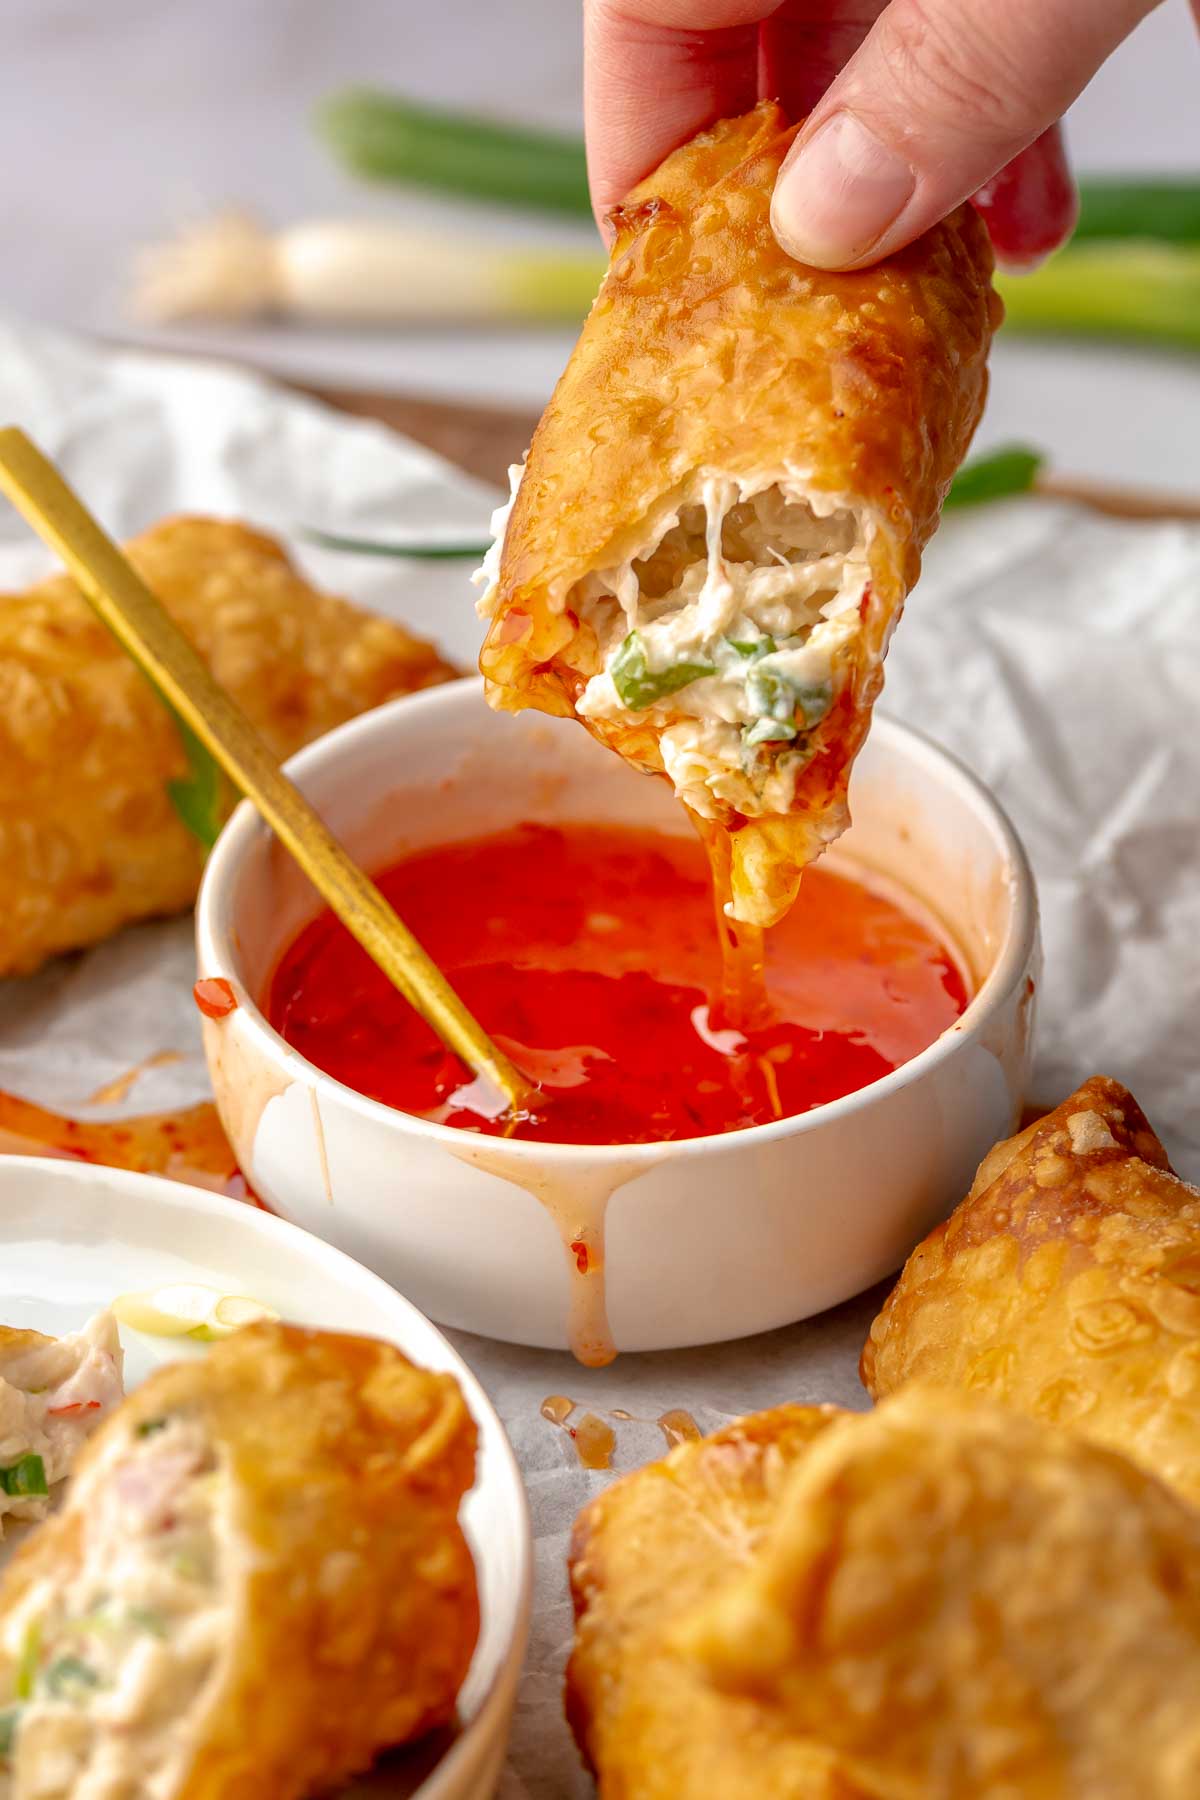 Crab rangoon egg roll being dipped into sweet chili sauce.